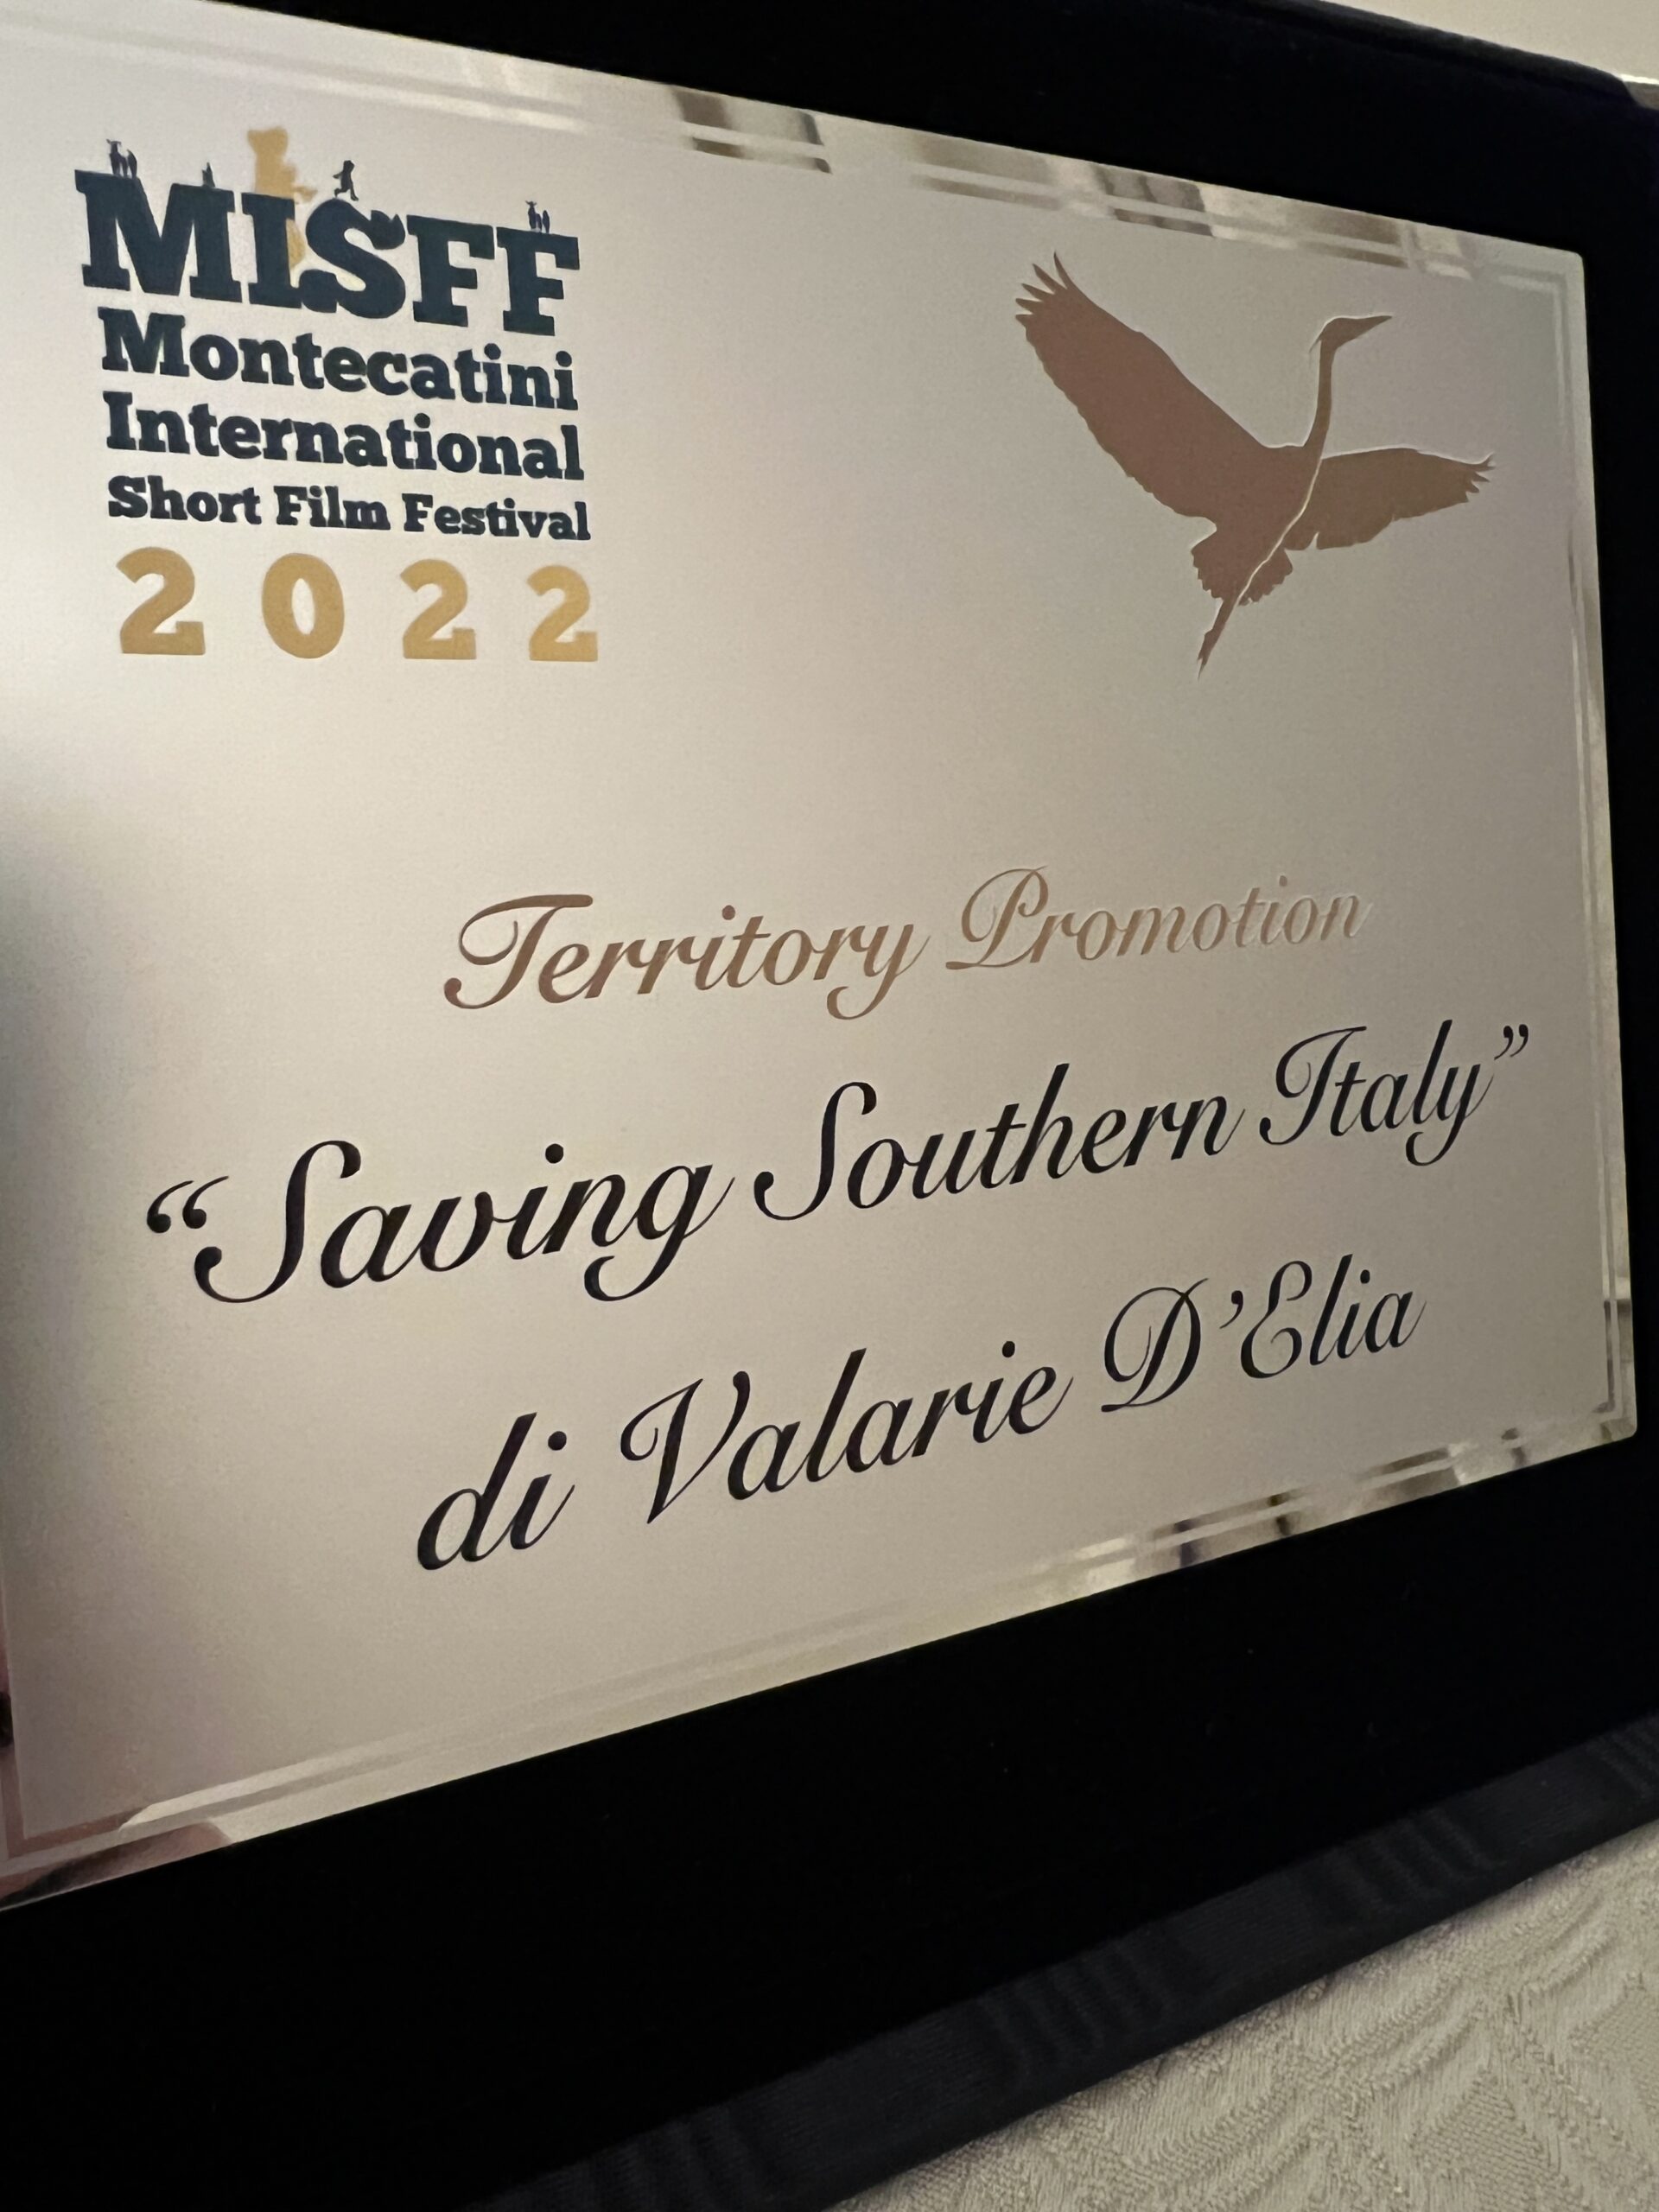 “Saving Southern Italy” Wins Two Awards at Montecatini Film Festival